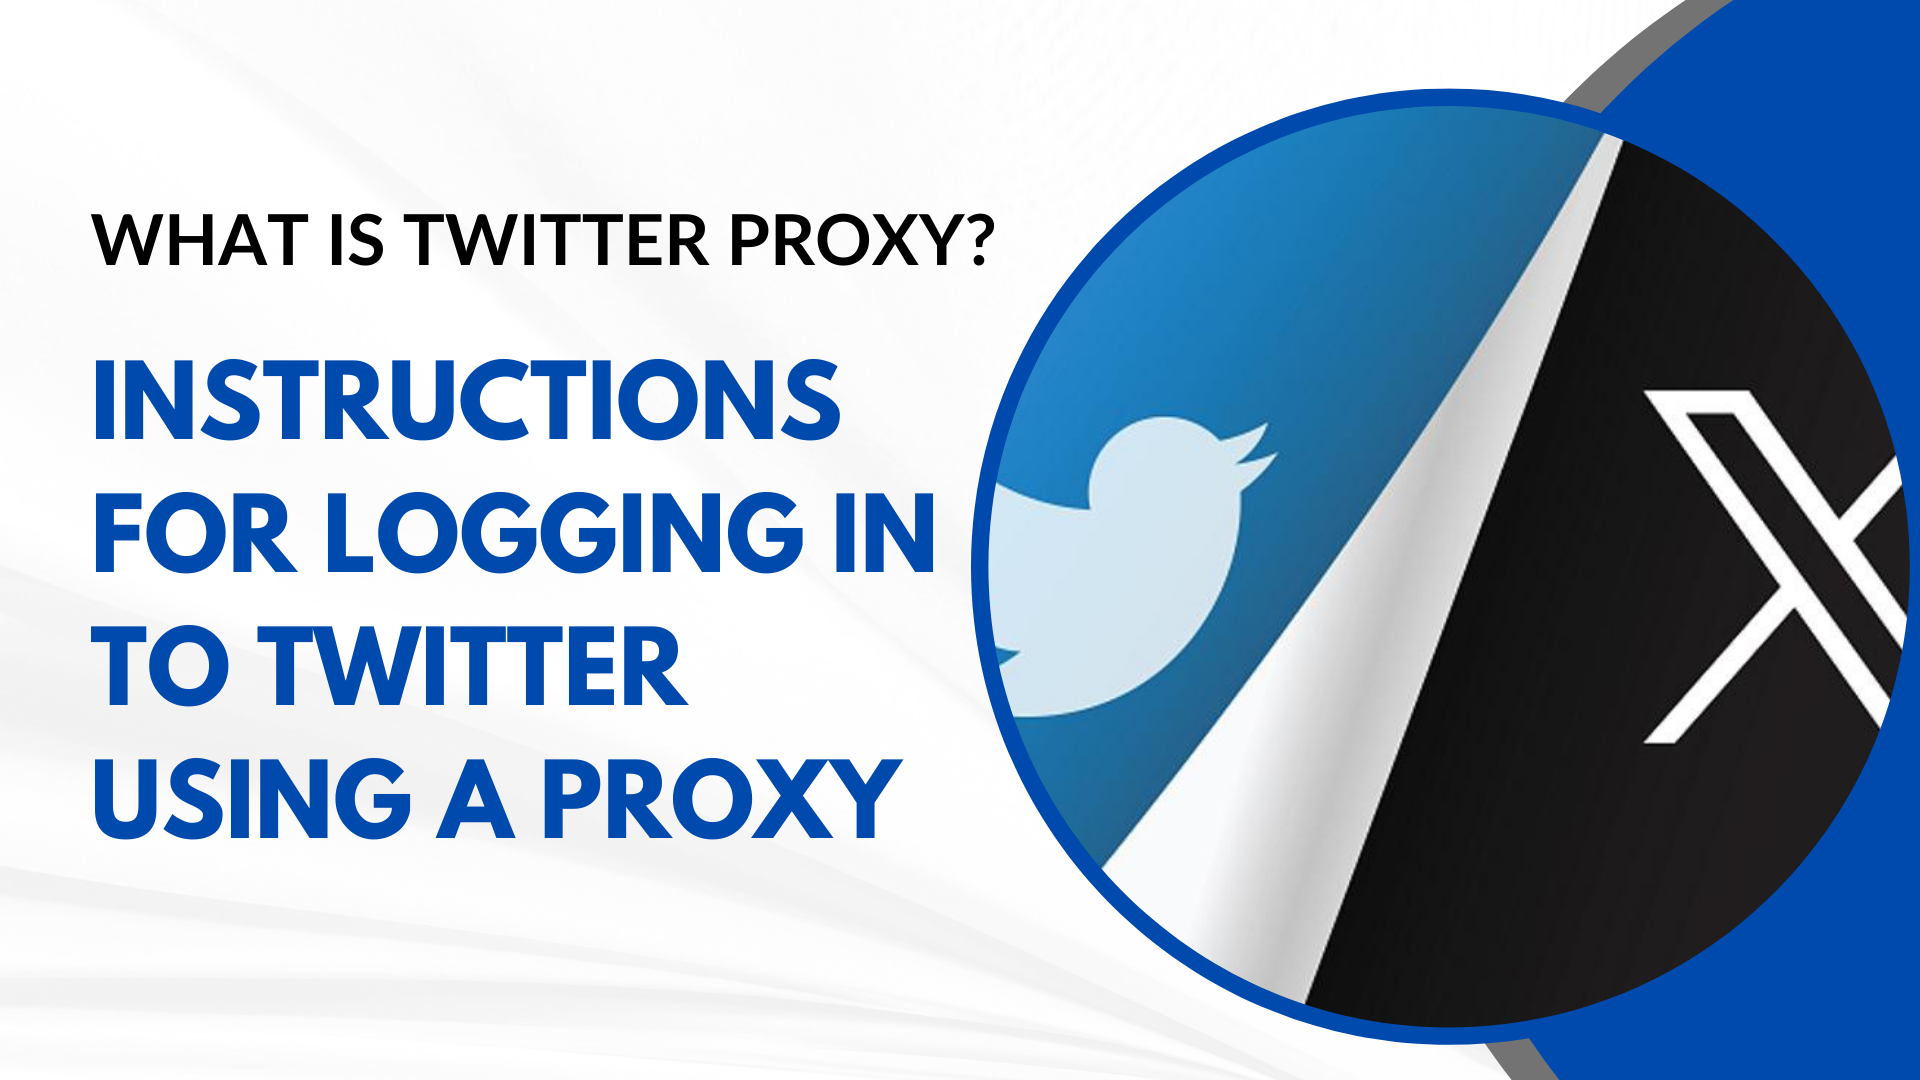 What is Twitter Proxy? Instructions for logging in to Twitter using a Proxy